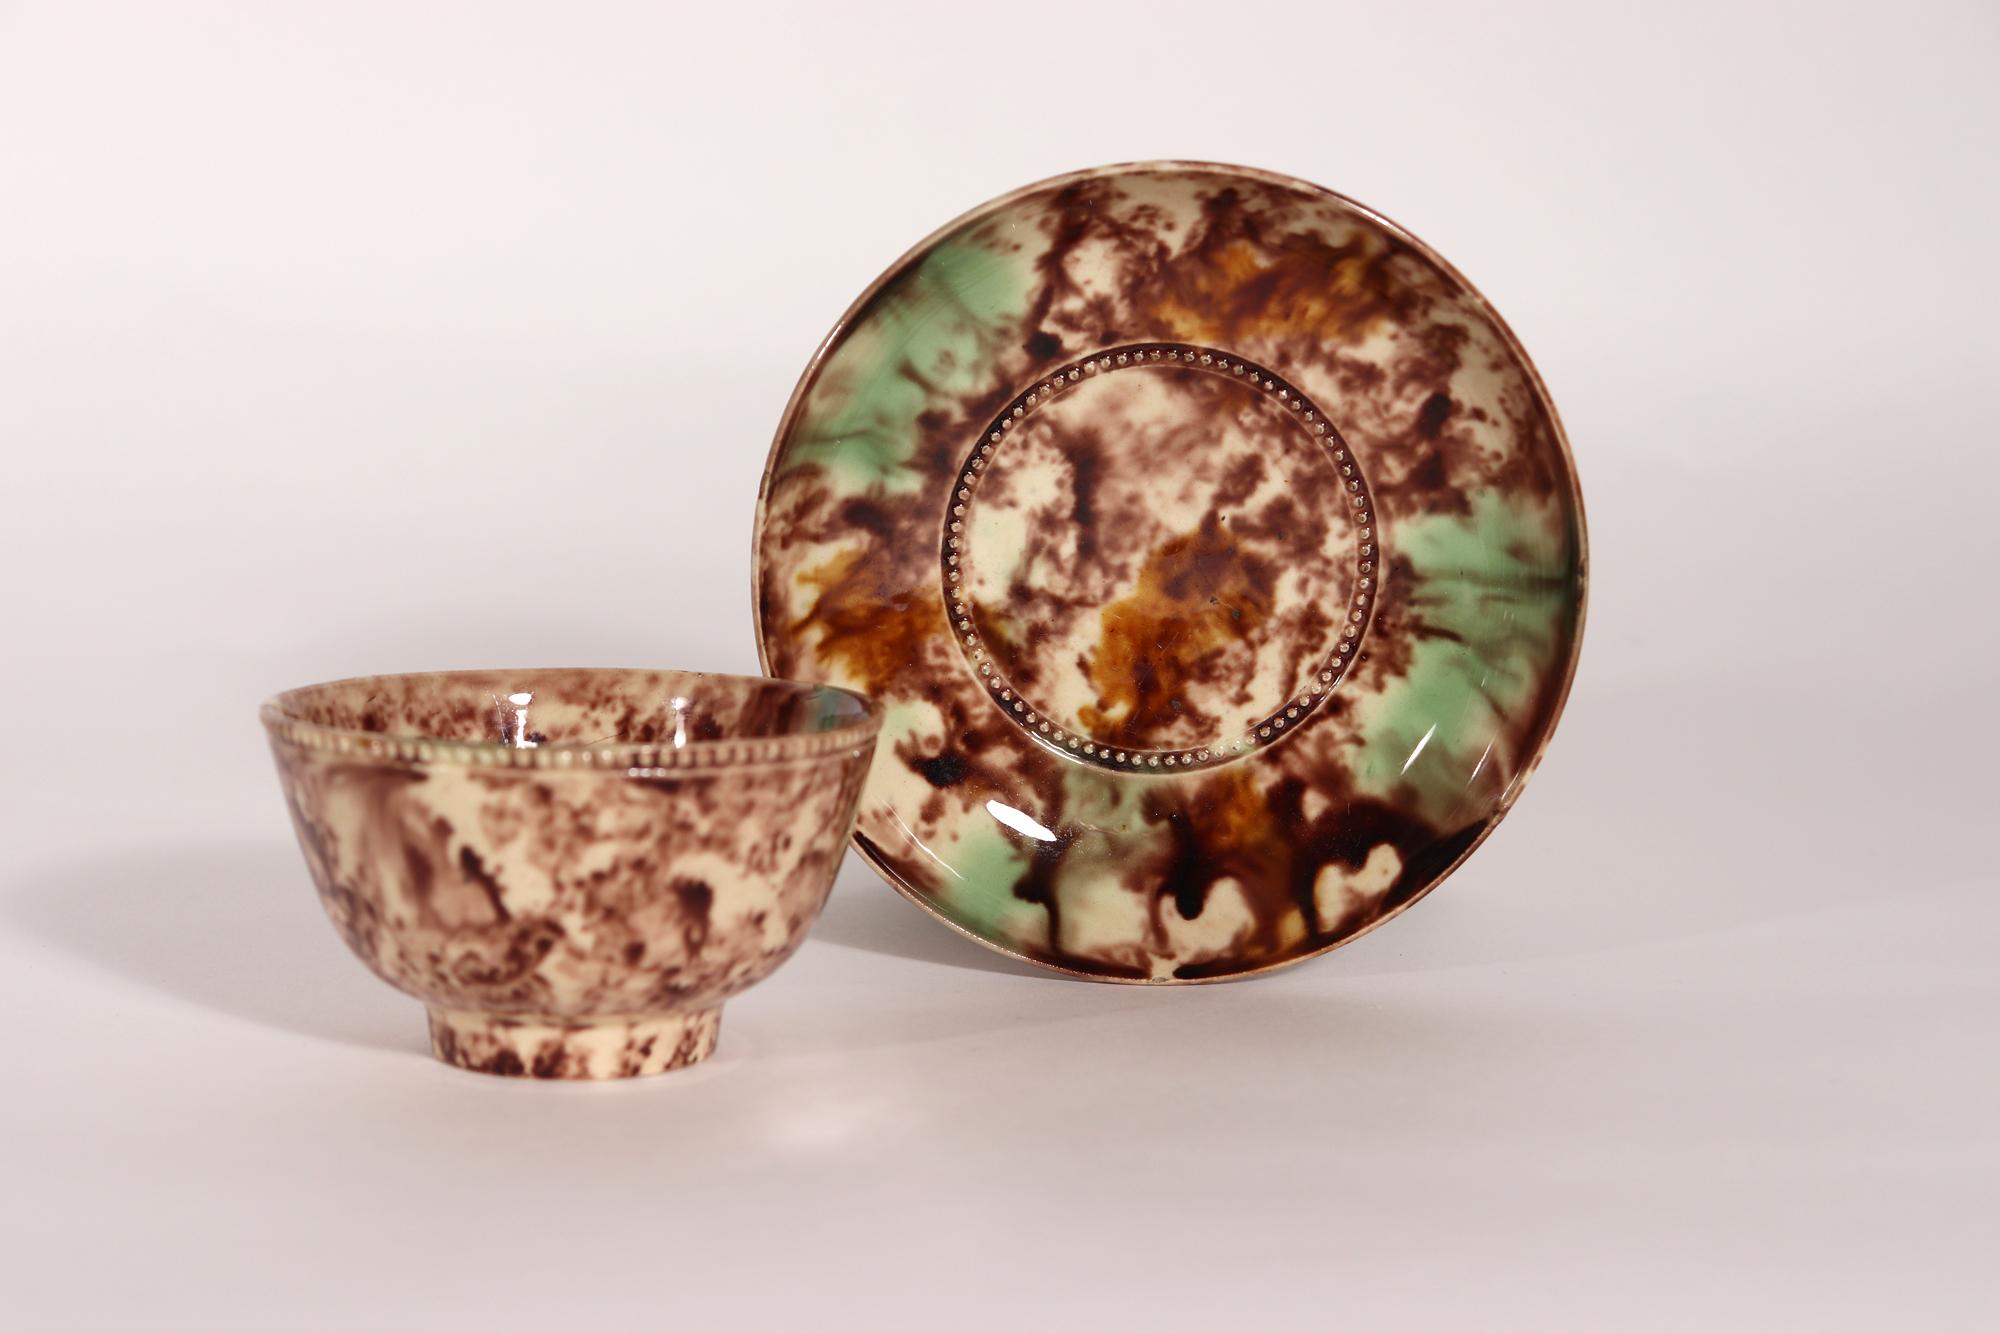 English Creamware Whieldon-type Tortoiseshell Tea Bowl & Saucer,

The 18th-century creamware tea bowl and saucer are decorated in tortoise-shell and green glazes.  The exterior of the bowl has a band of molded pearls as does the saucer around the